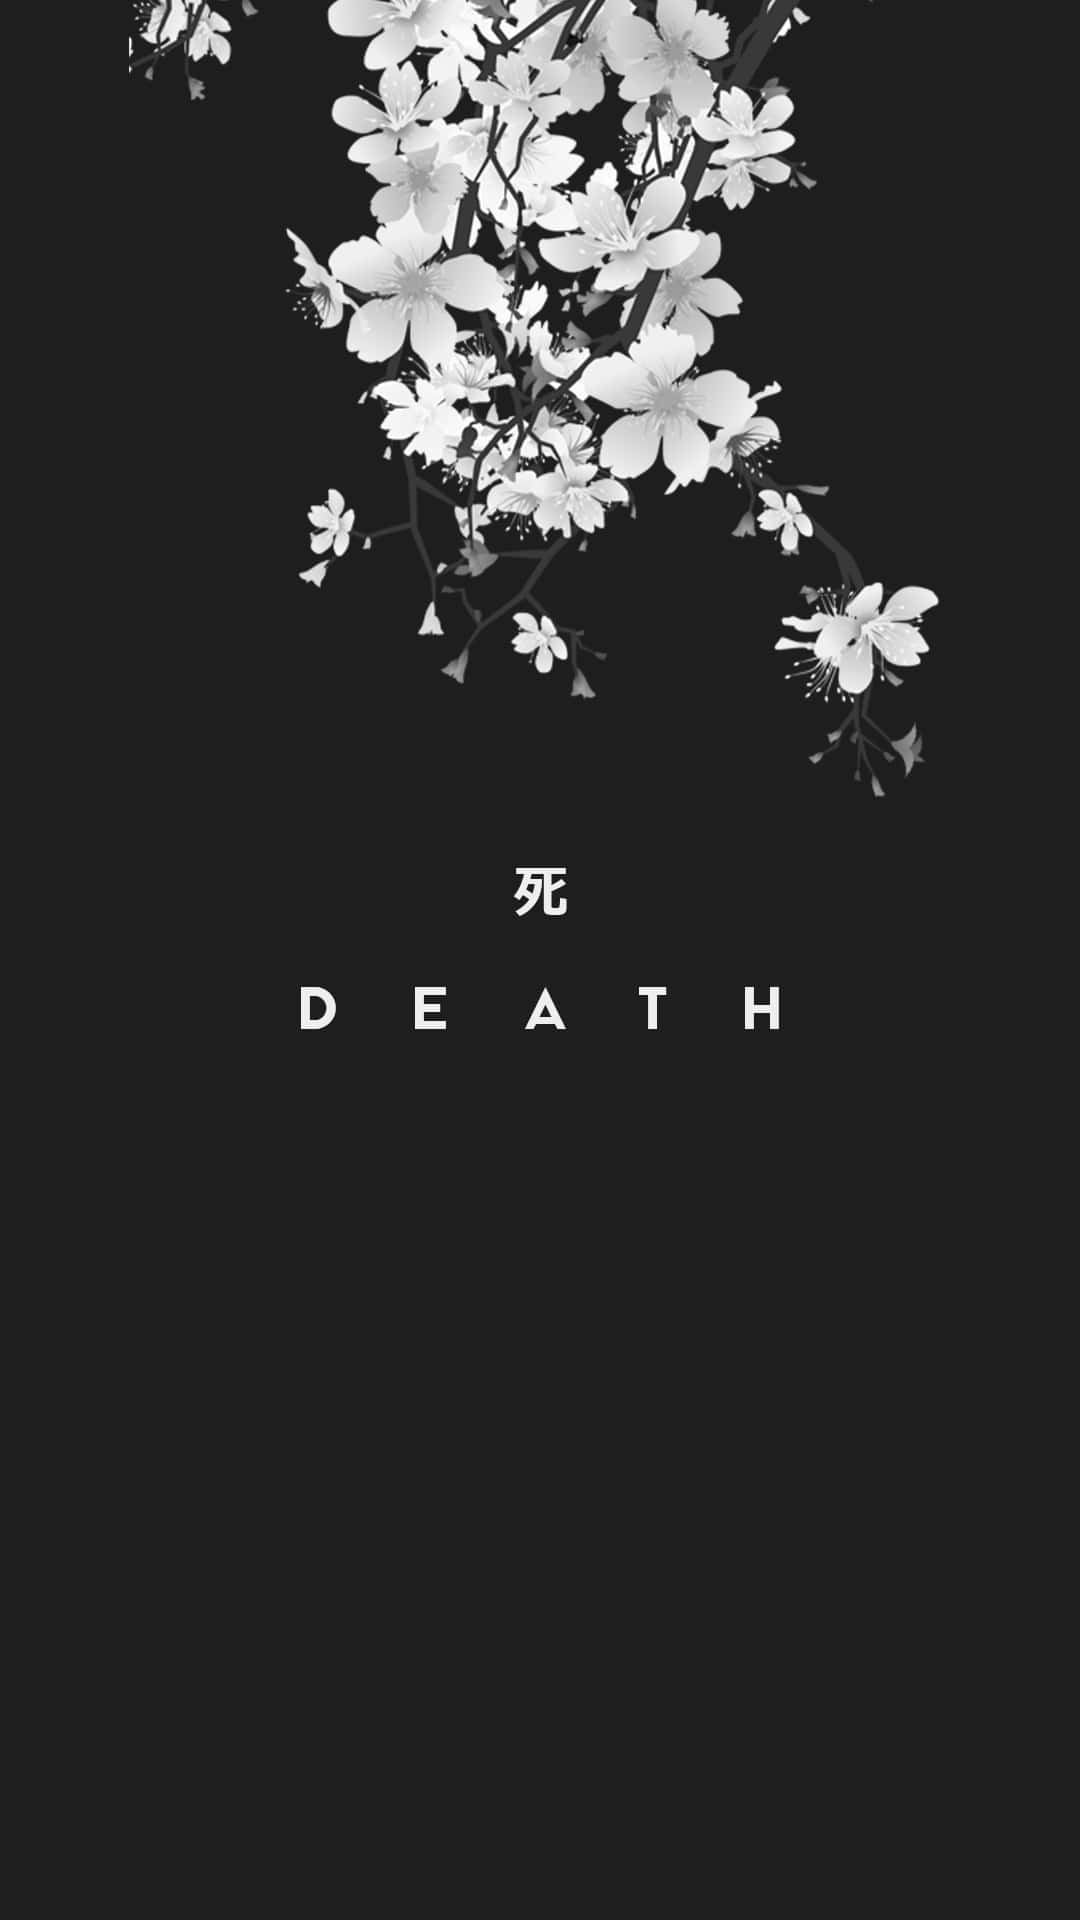 A Black And White Image Of A Flower With The Word Death